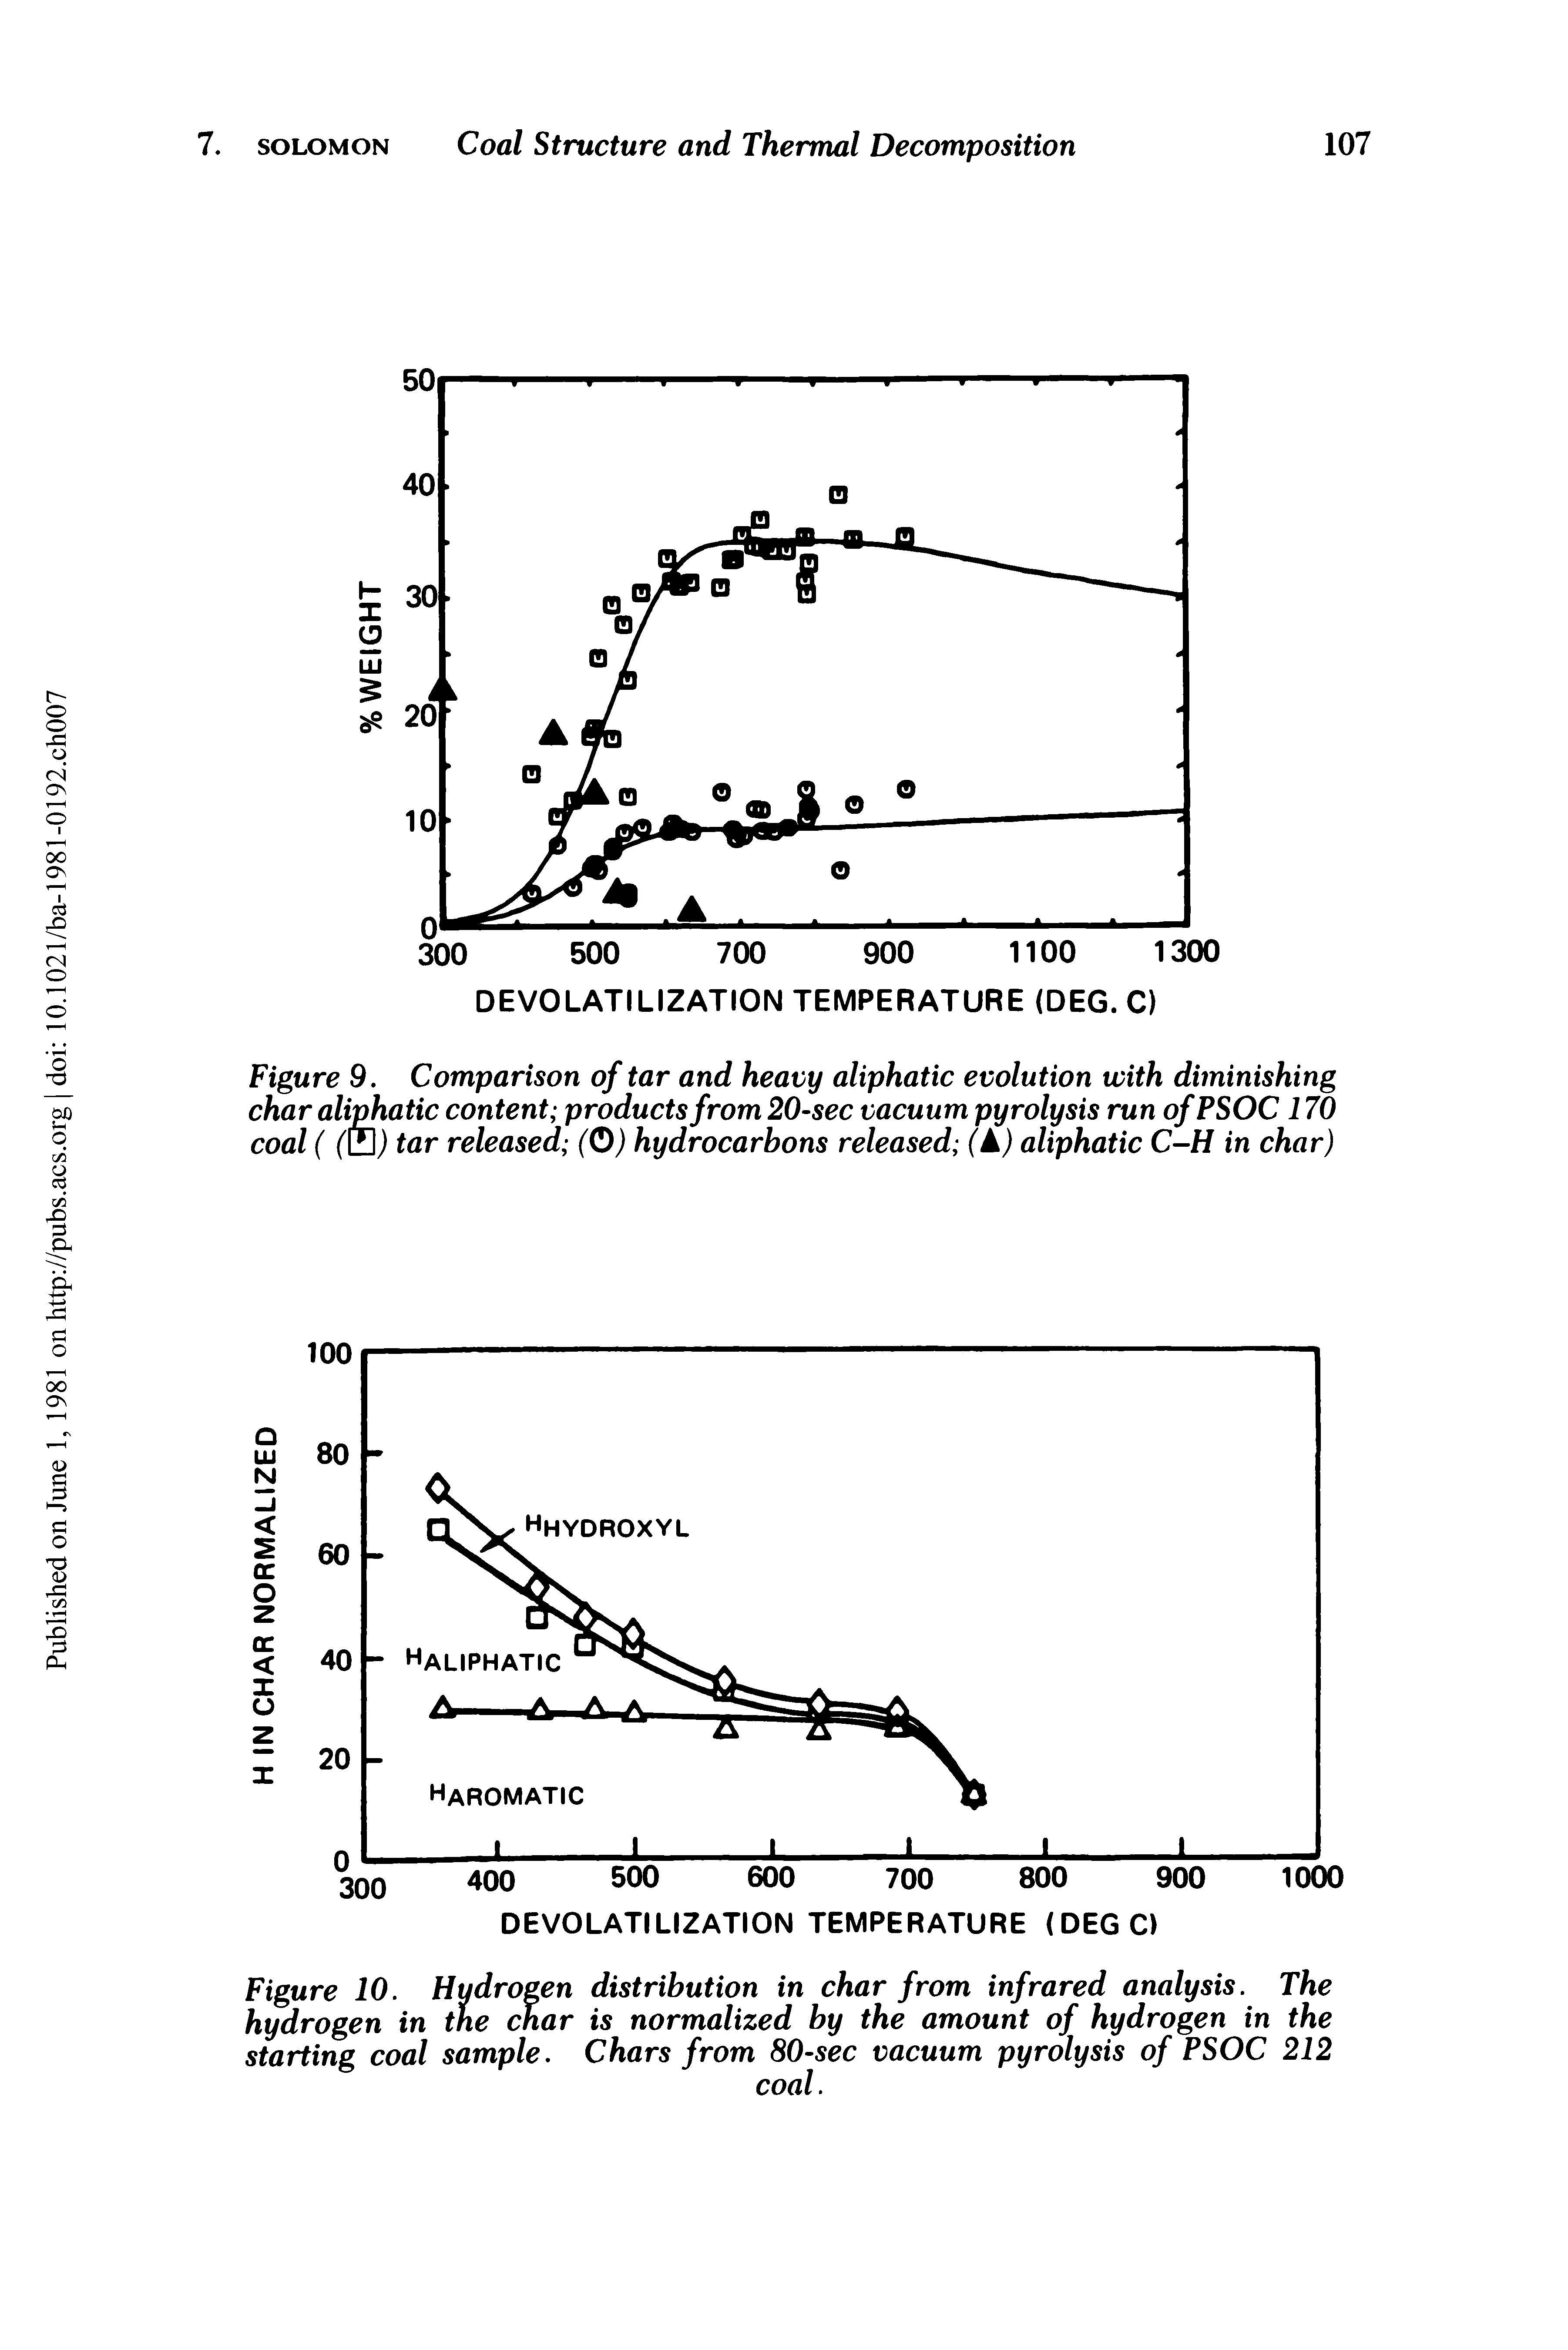 Figure 10. Hydrogen distribution in char from infrared analysis. The hydrogen in the char is normalized by the amount of hydrogen in the starting coal sample. Chars from 80-sec vacuum pyrolysis of PSOC 212...